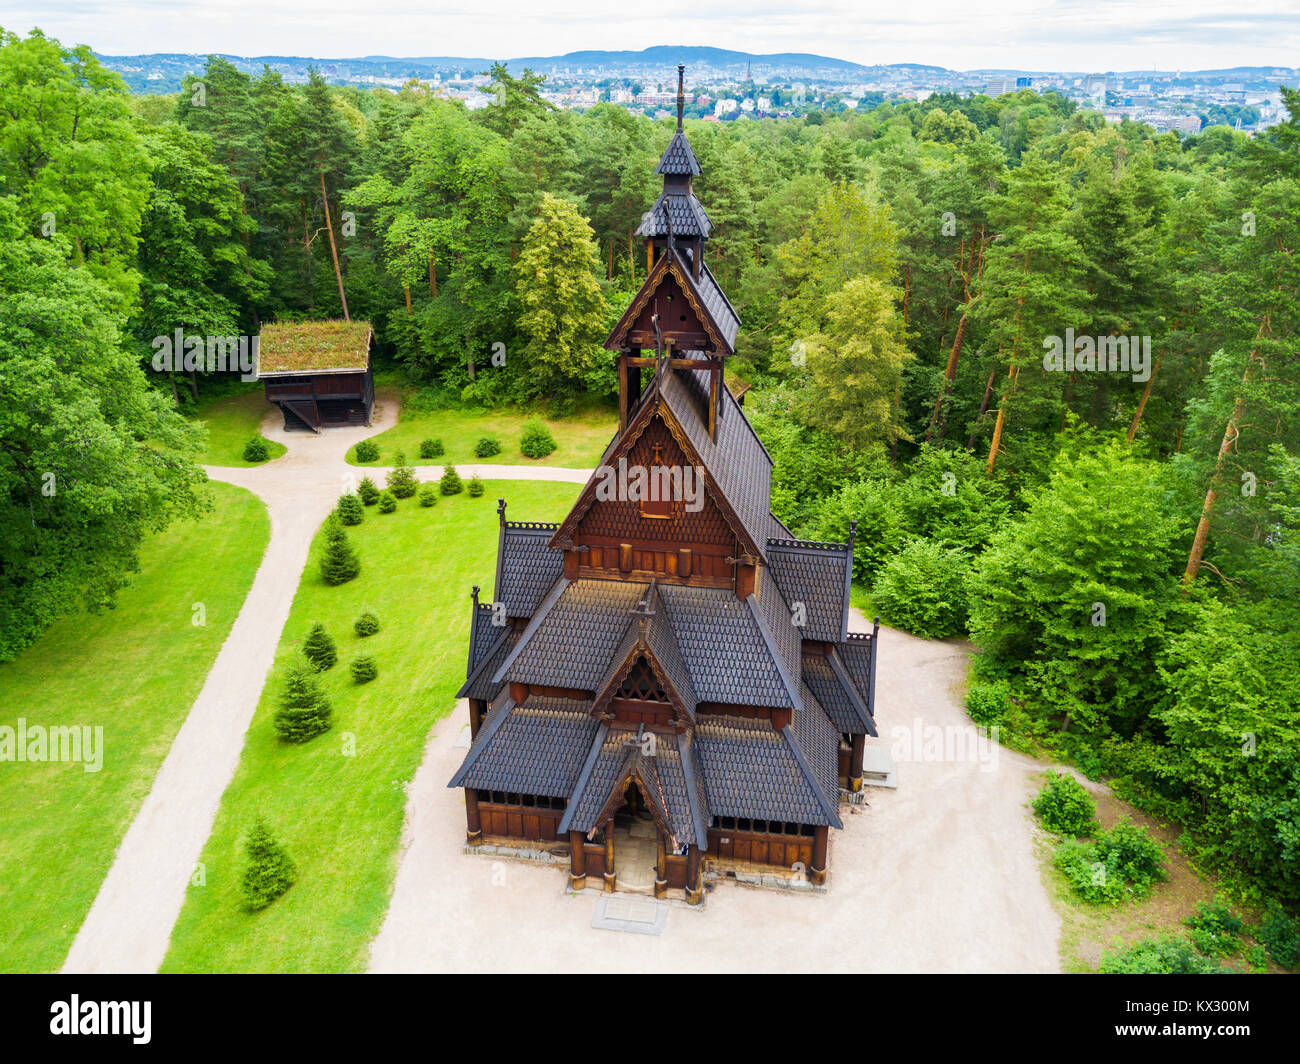 Gol Stave Church or Gol Stavkyrkje is a stave church in Oslo, Norway. Gol Stave Church located in the Norwegian Museum of Cultural History at Bygdoy p Stock Photo